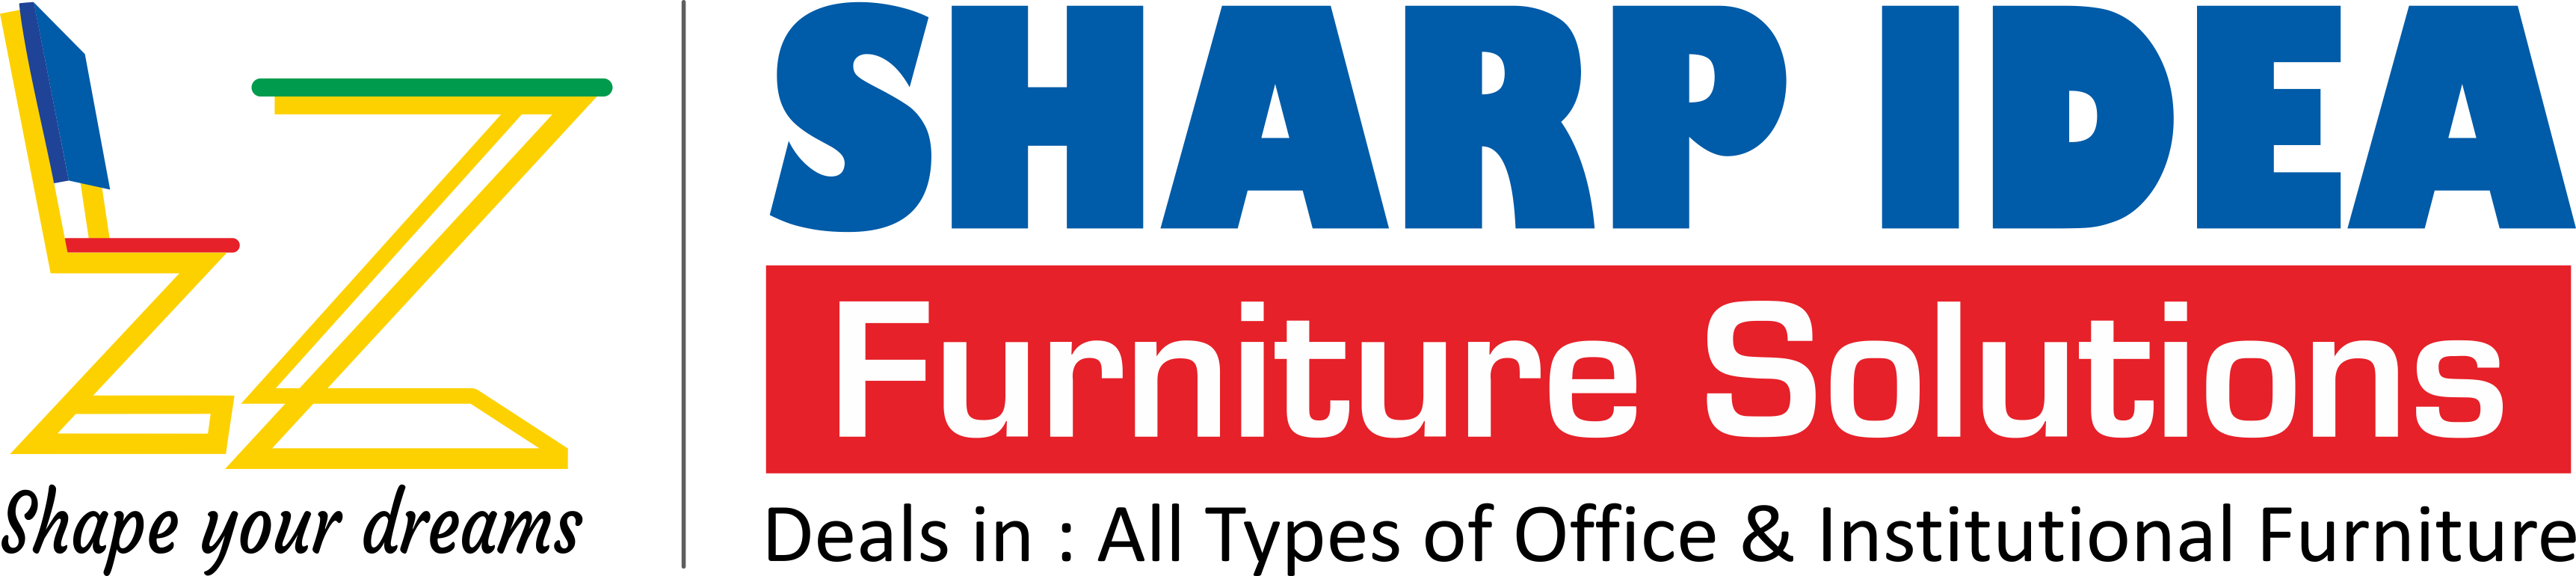 Welcome to Sharpline Furniture Solutions